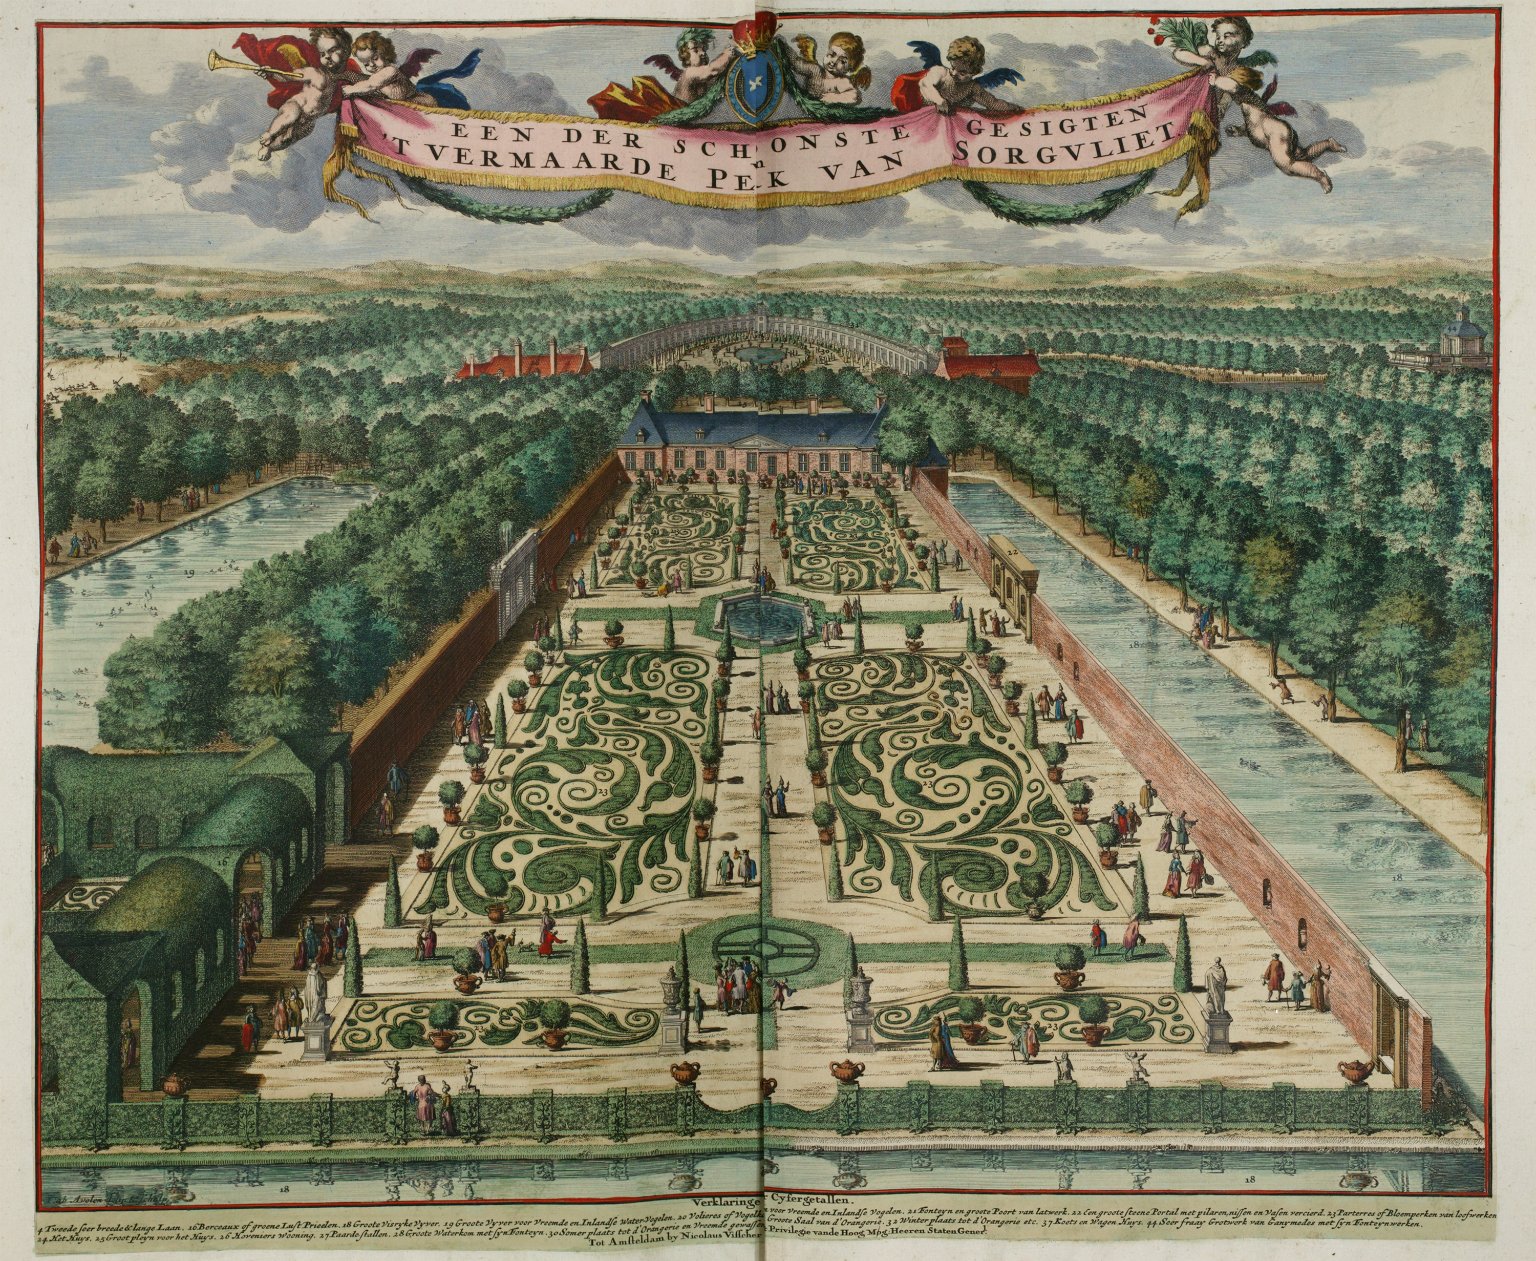 [One+of+the+most+beautiful+views+of+the+parterre+of+the+park+of+Sorgvliet+[Zorgvliet].jpg]